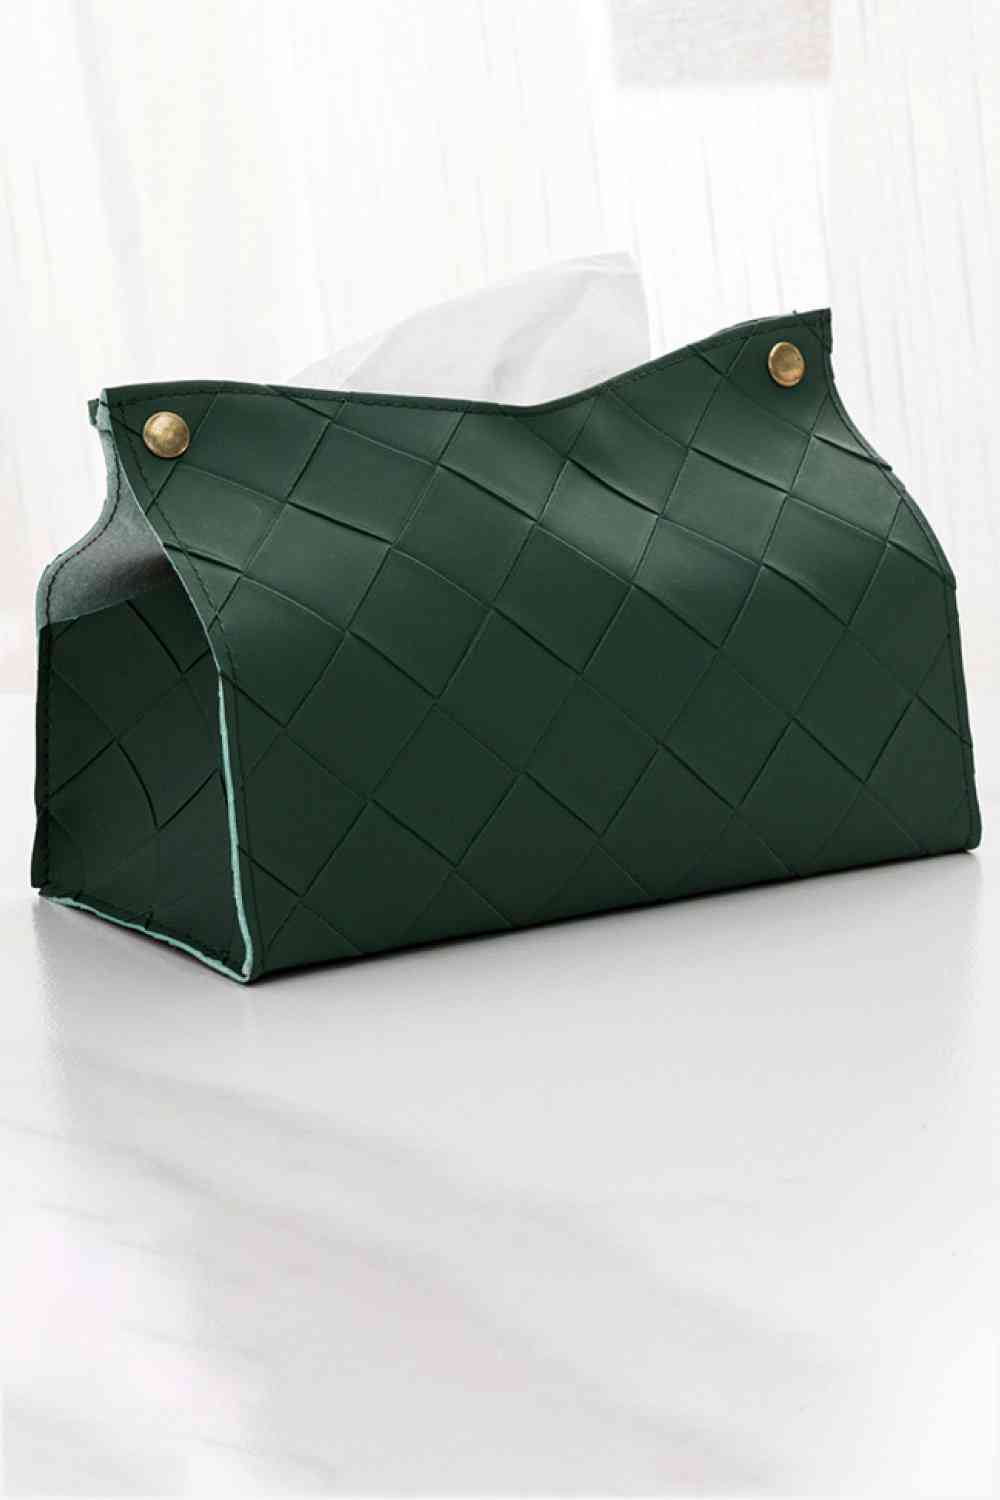 2-Pack Woven PU Tissue Box Covers Army Green One Size 